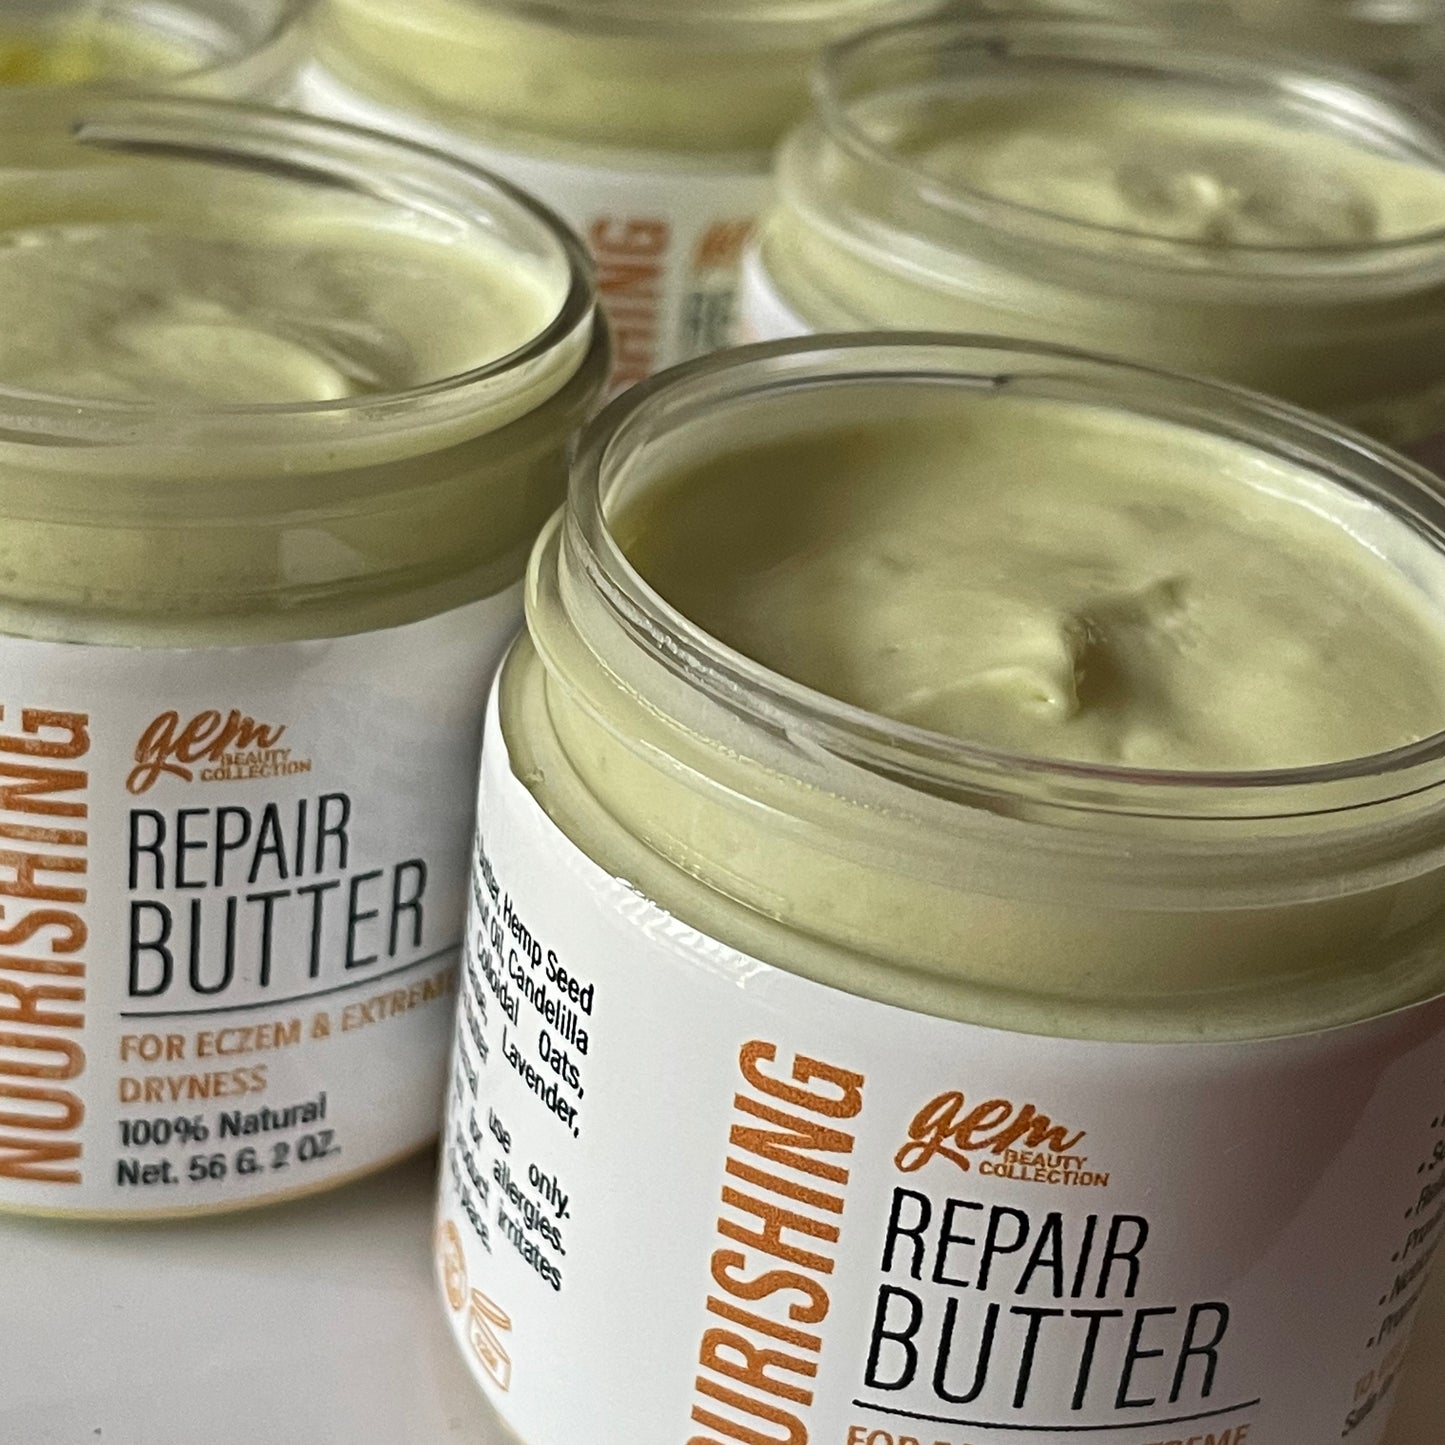 Nourishing Repair Butter - For Eczema & Extreme Dryness - Gem Beauty Collection